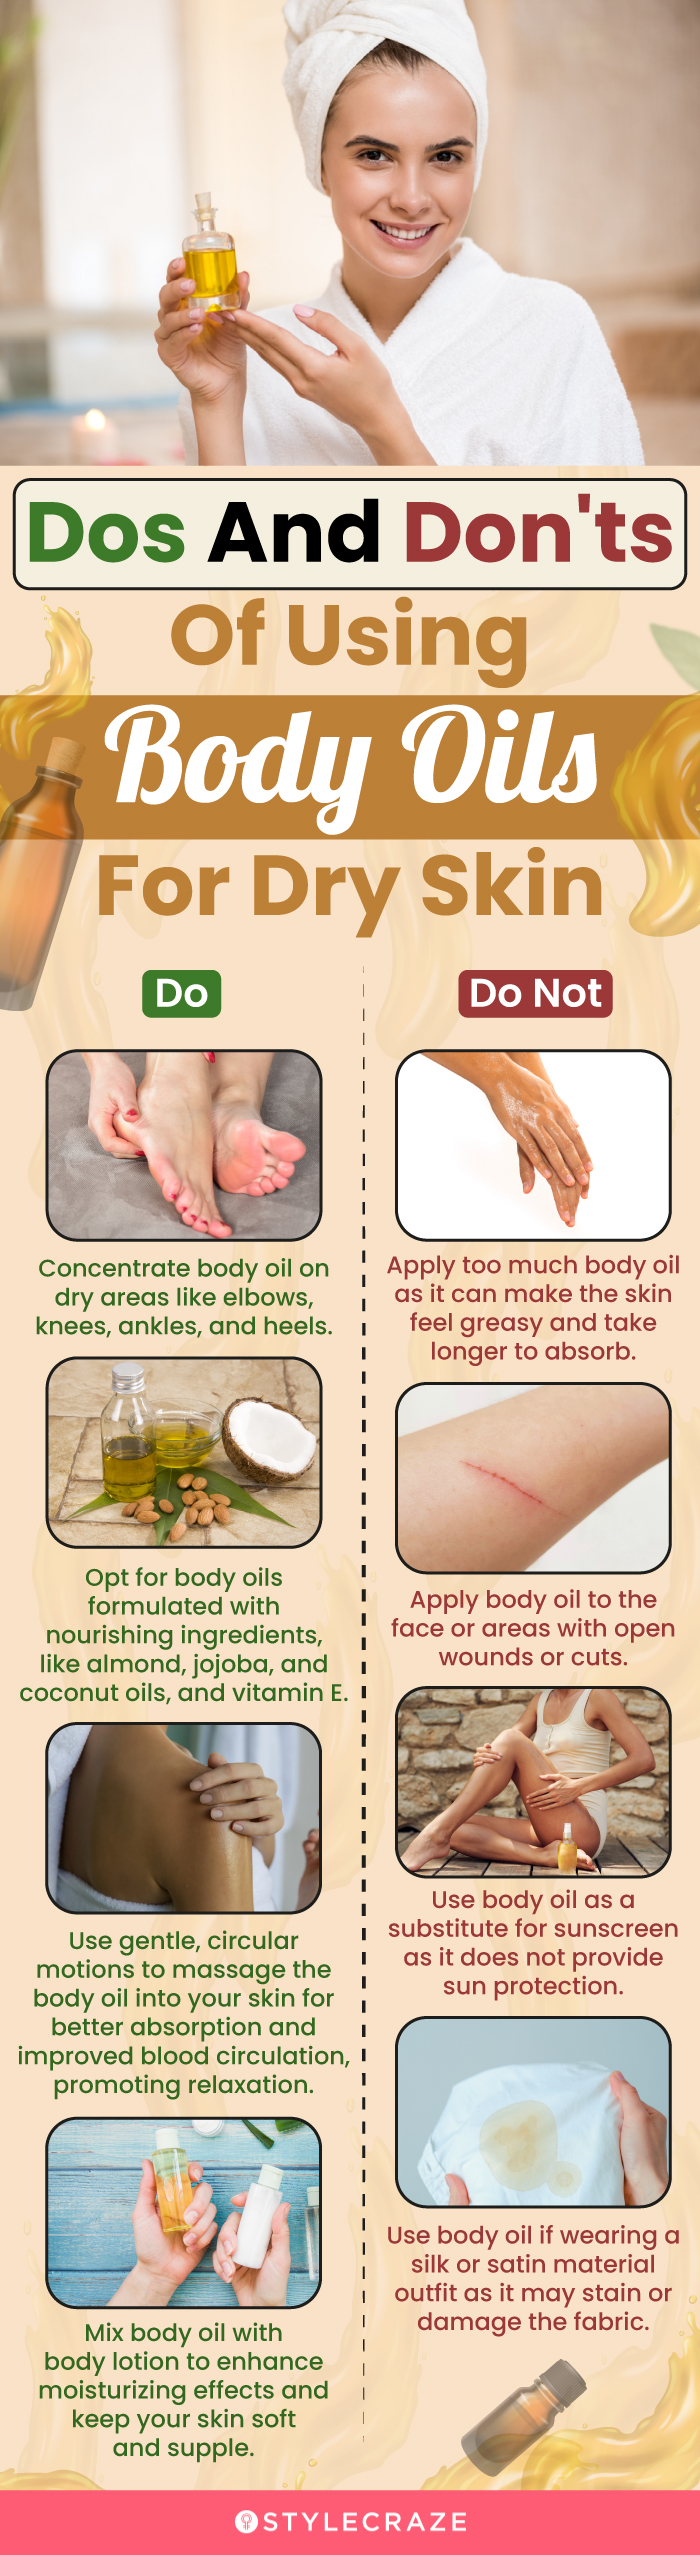 Dos And Don'ts Of Using Body Oils For Dry Skin(infographic)